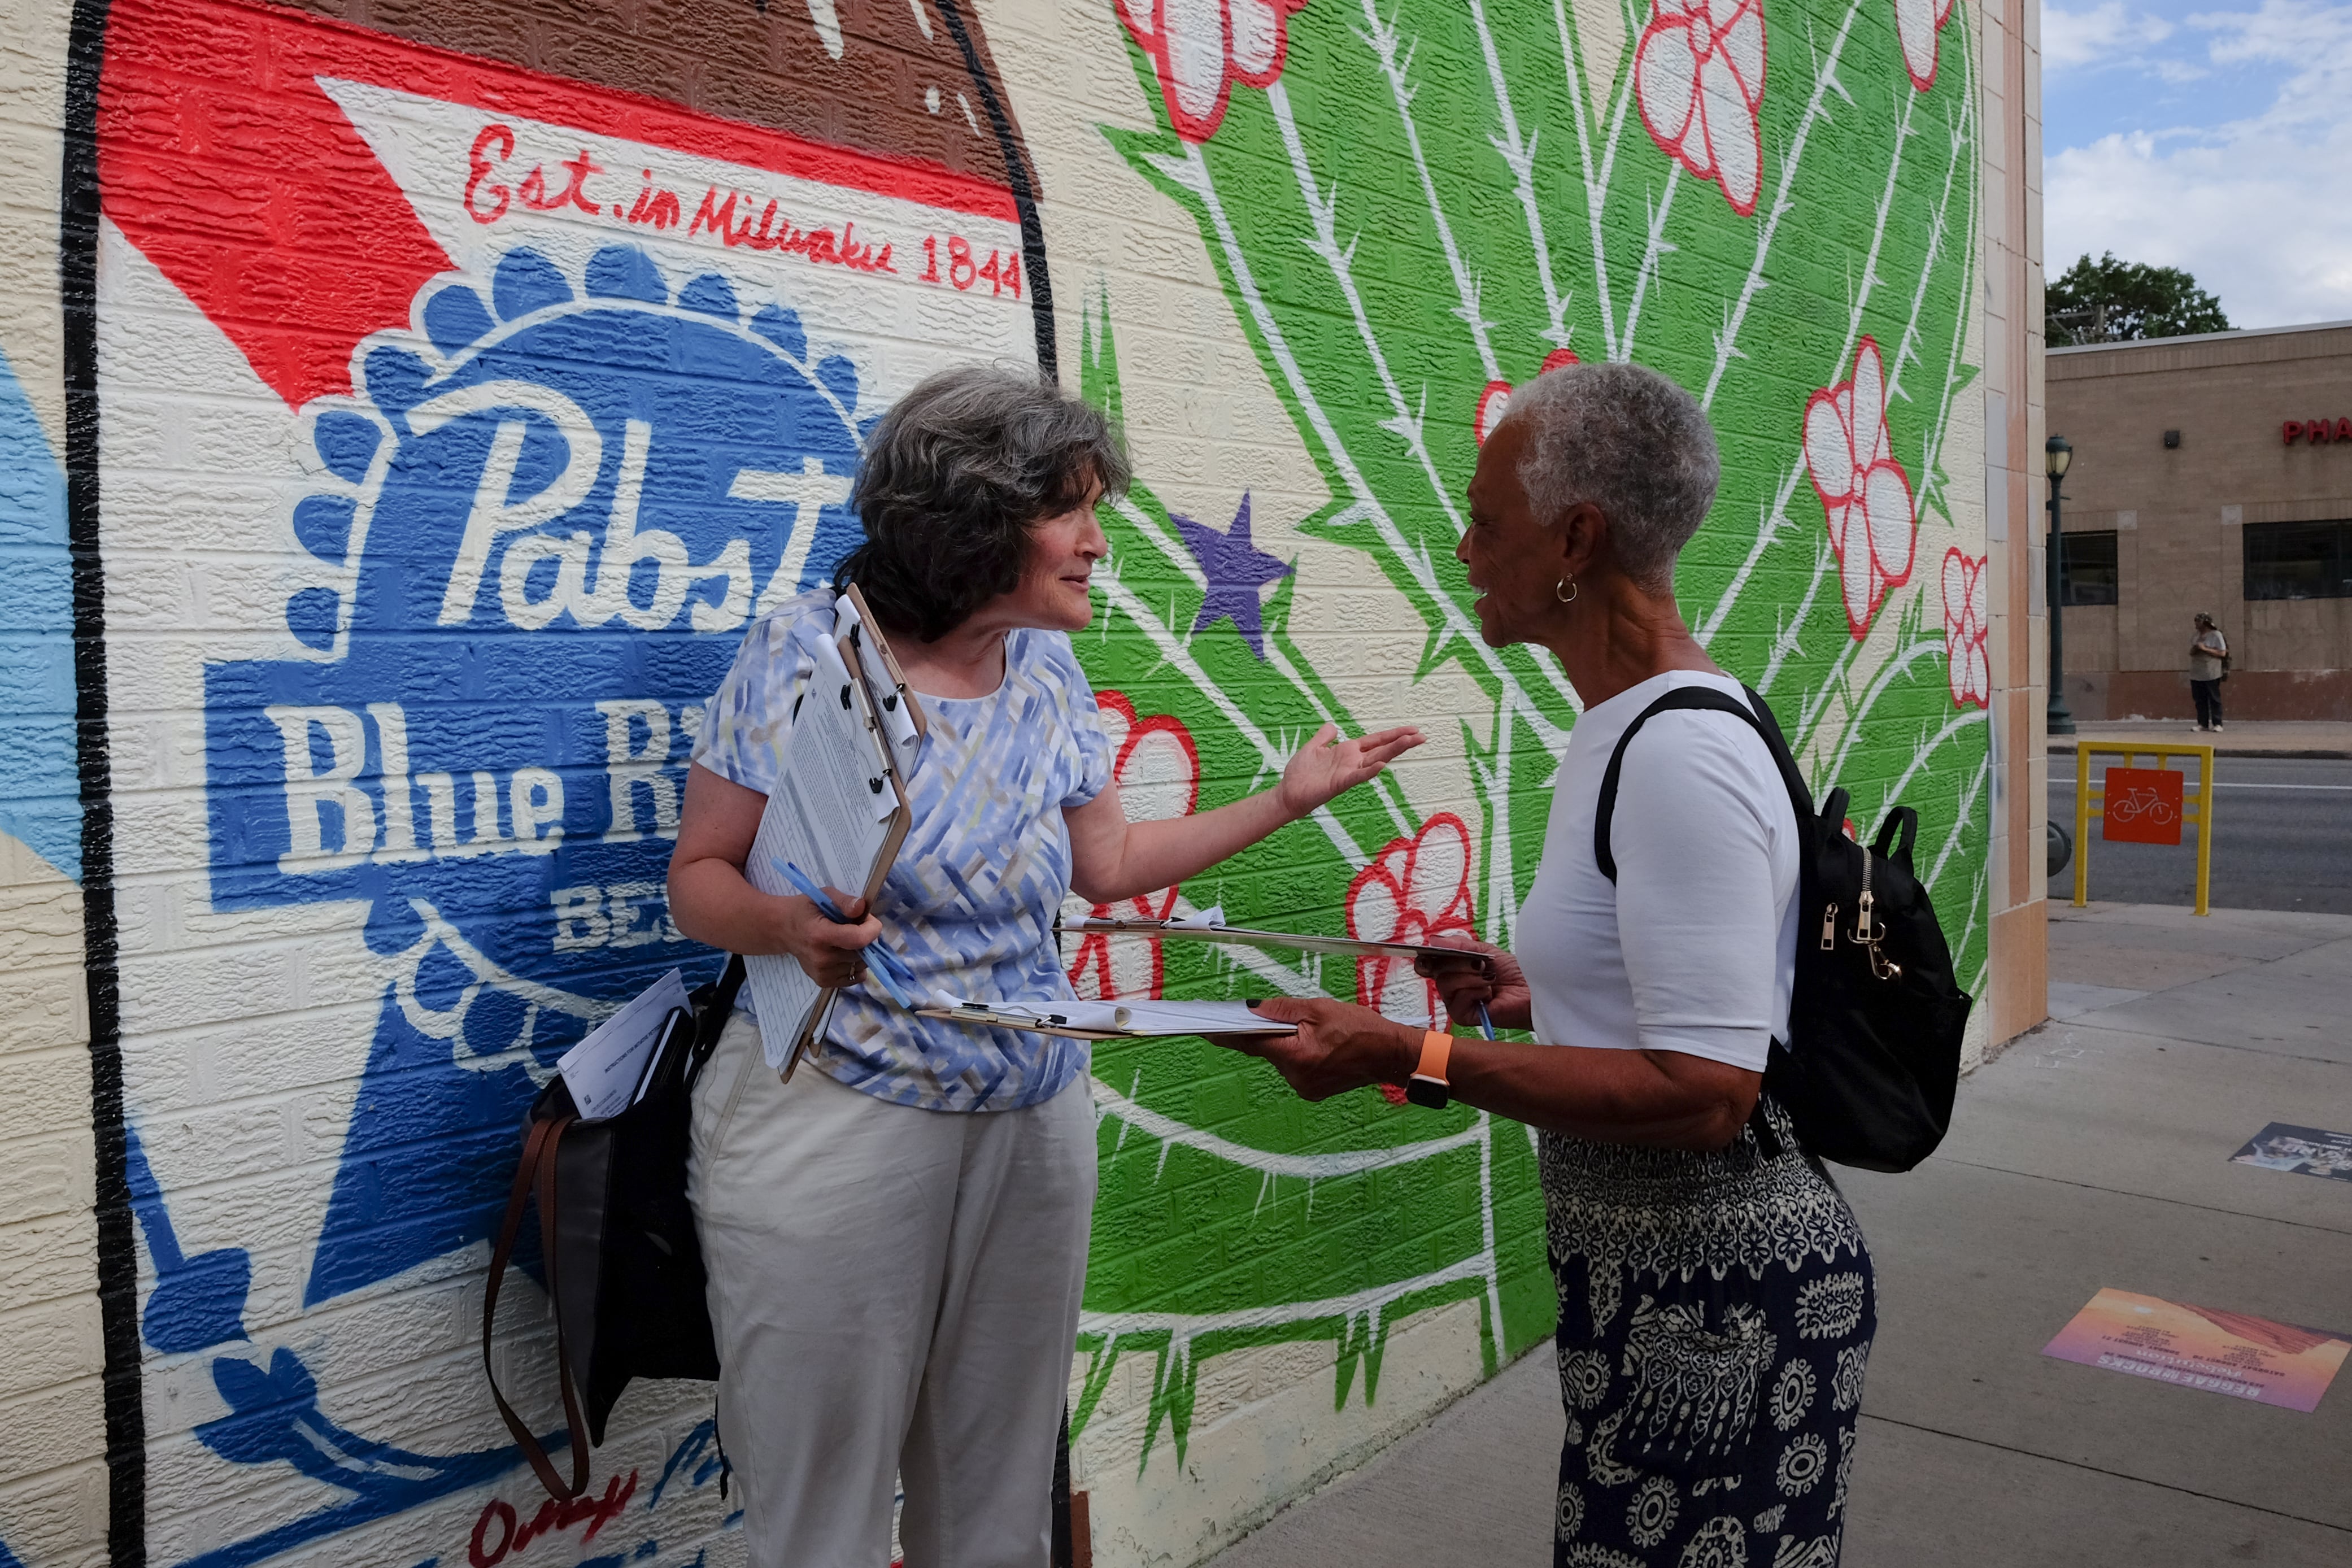 A white woman with shoulder-length salt-and-pepper hair and a blue-and-white shirt talks with a Black woman with short-cropped salt-and-pepper hair and a white t-shirt. Both women hold clipboards with signature sheets for a ballot measure. They’re standing against a wall with a mural that shows a cactus and a large Pabst Blue Ribbon bottle.